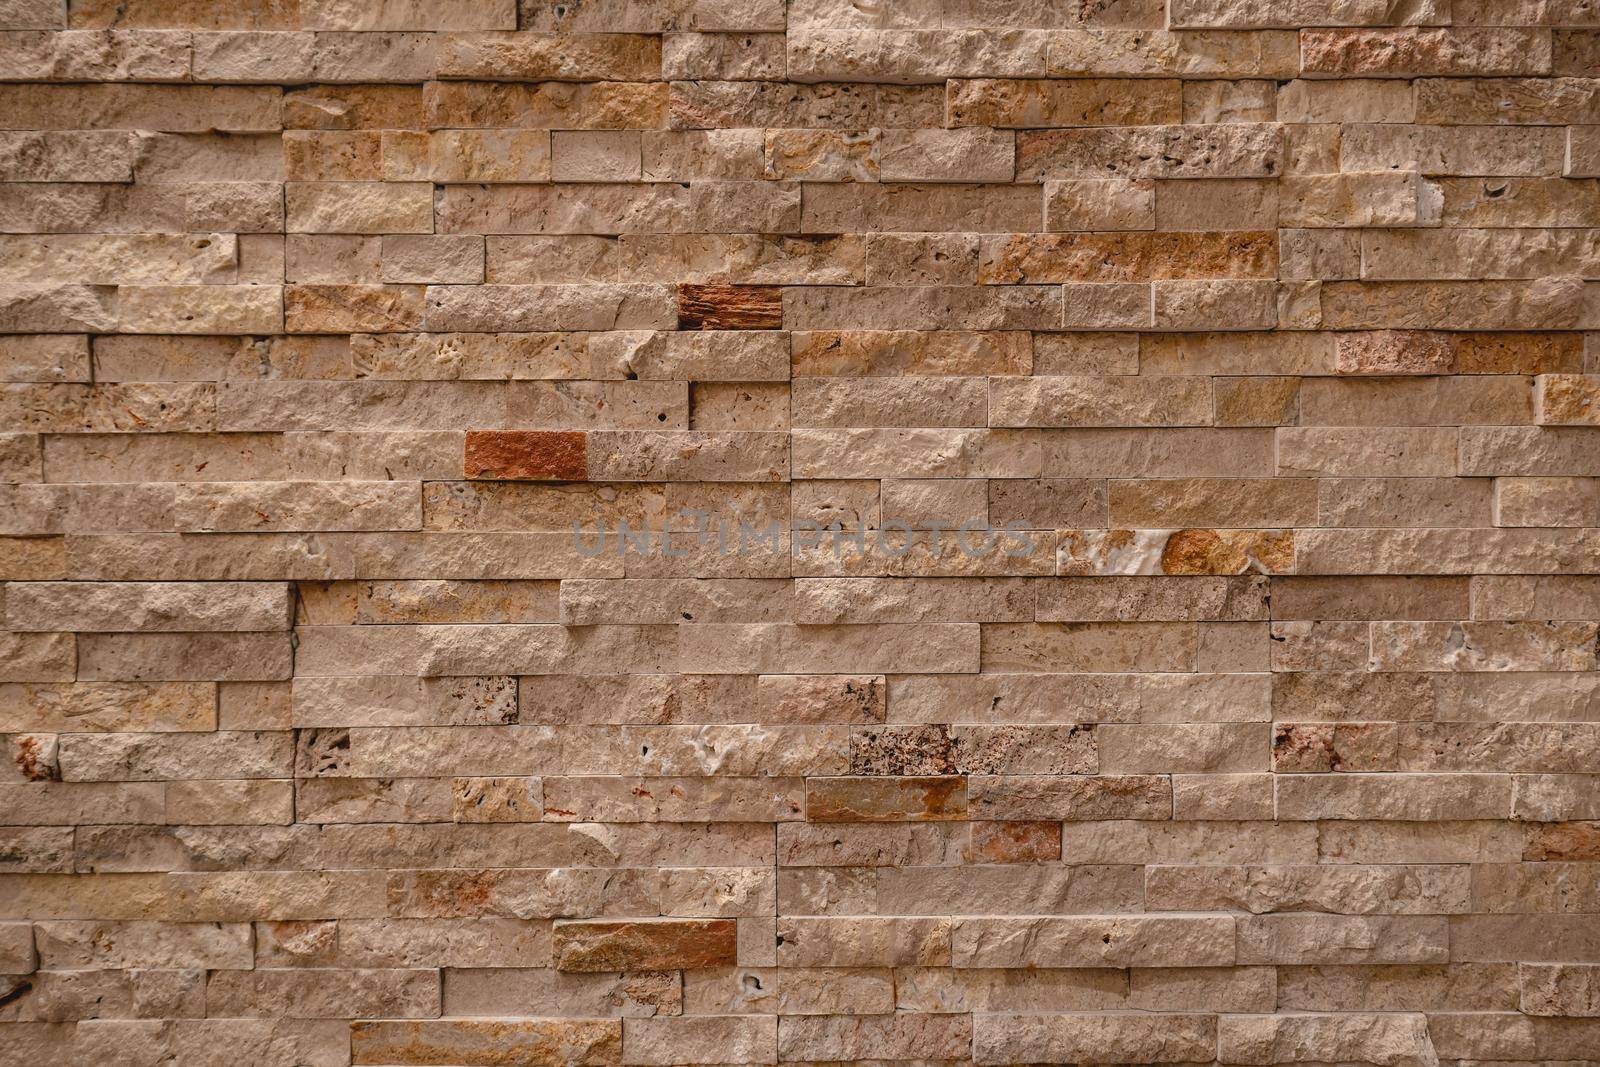 Black stone brick wall background, marbled textured.